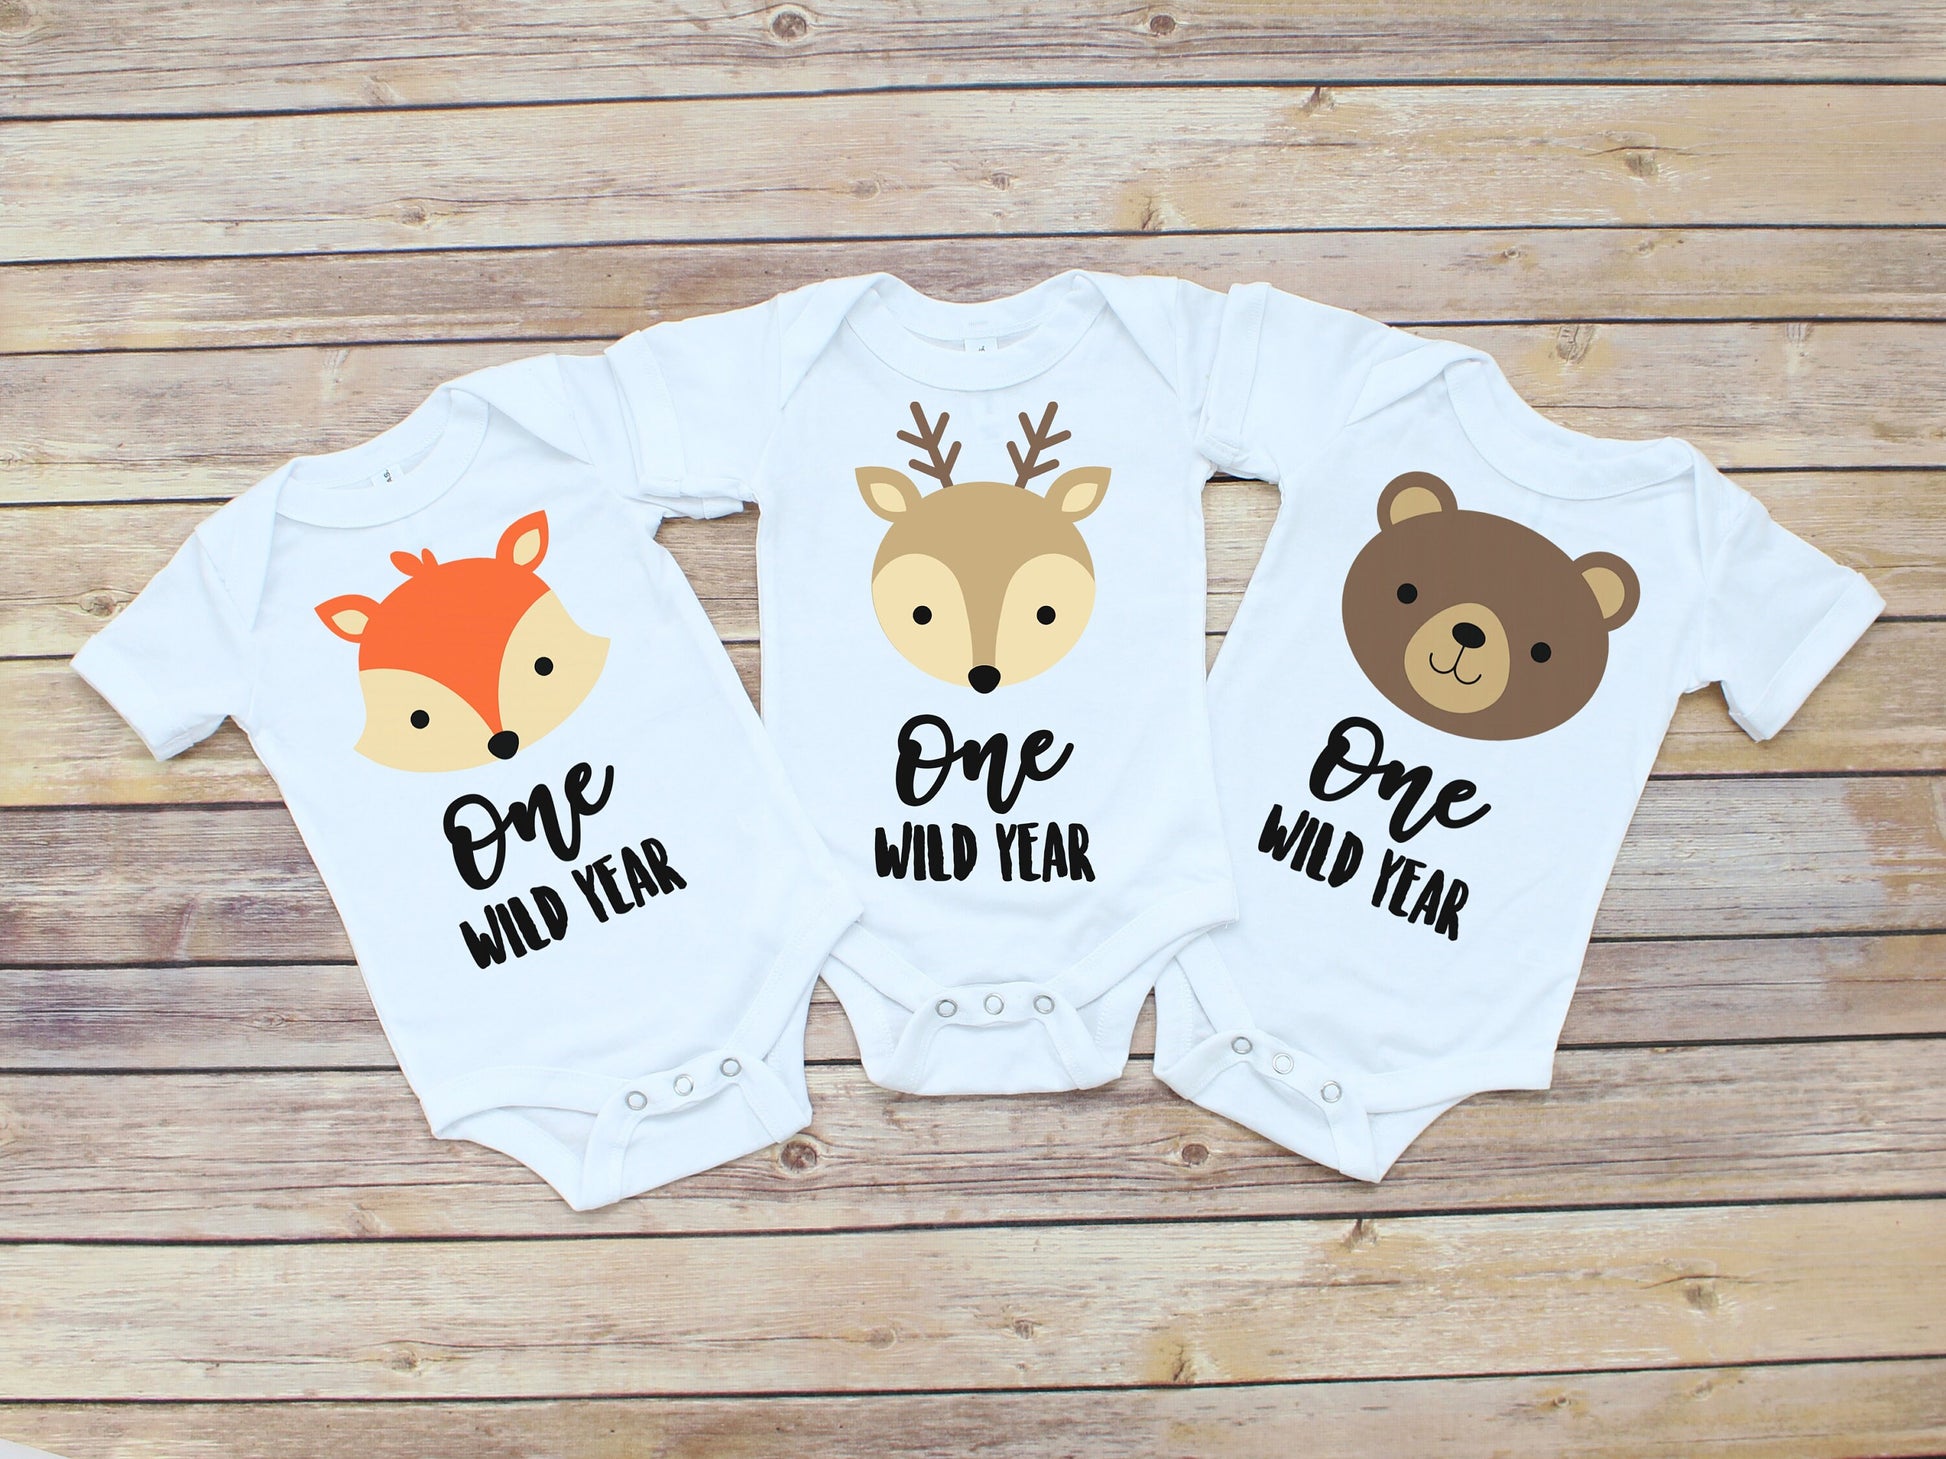 One Wild Year Infant Bodysuits or Shirts for Triplets - triplet first birthday - forest animals theme - woodland animals theme - wild one